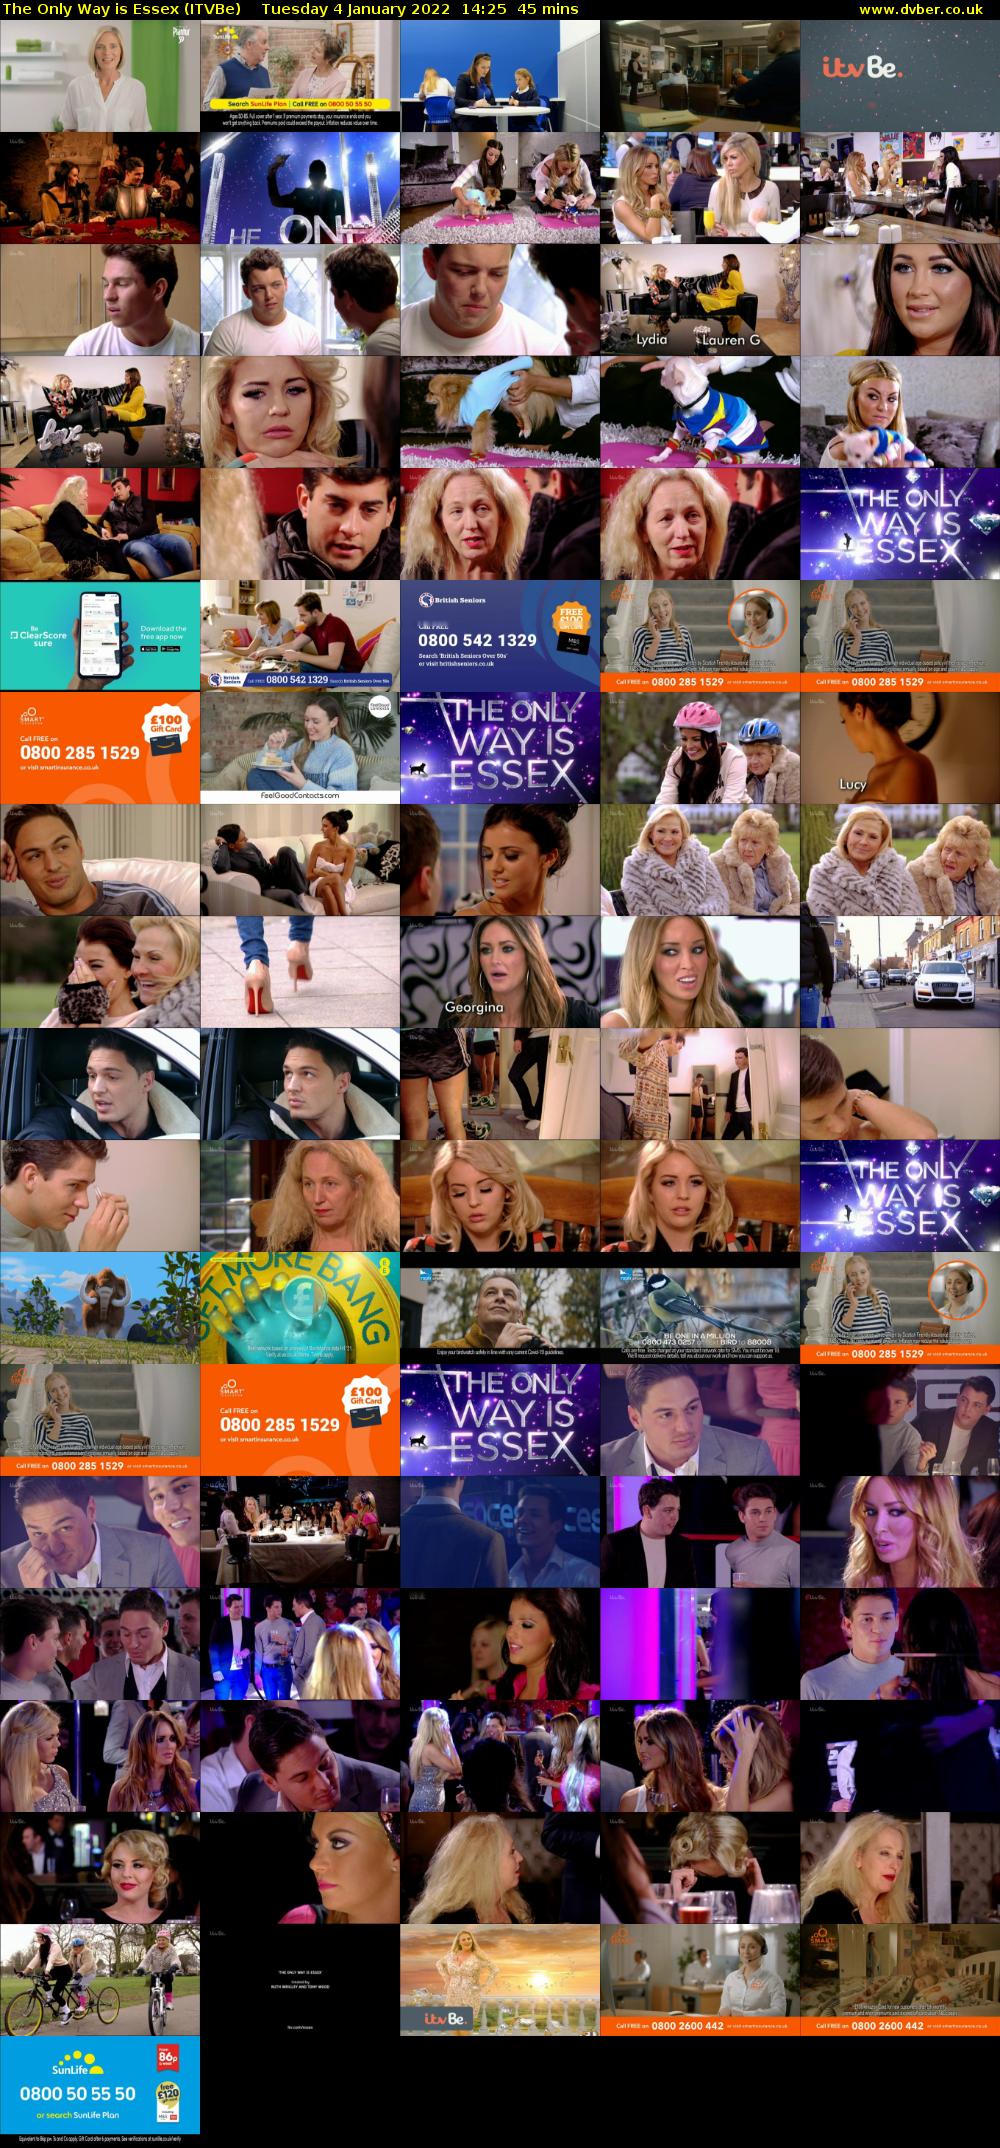 The Only Way is Essex (ITVBe) Tuesday 4 January 2022 14:25 - 15:10